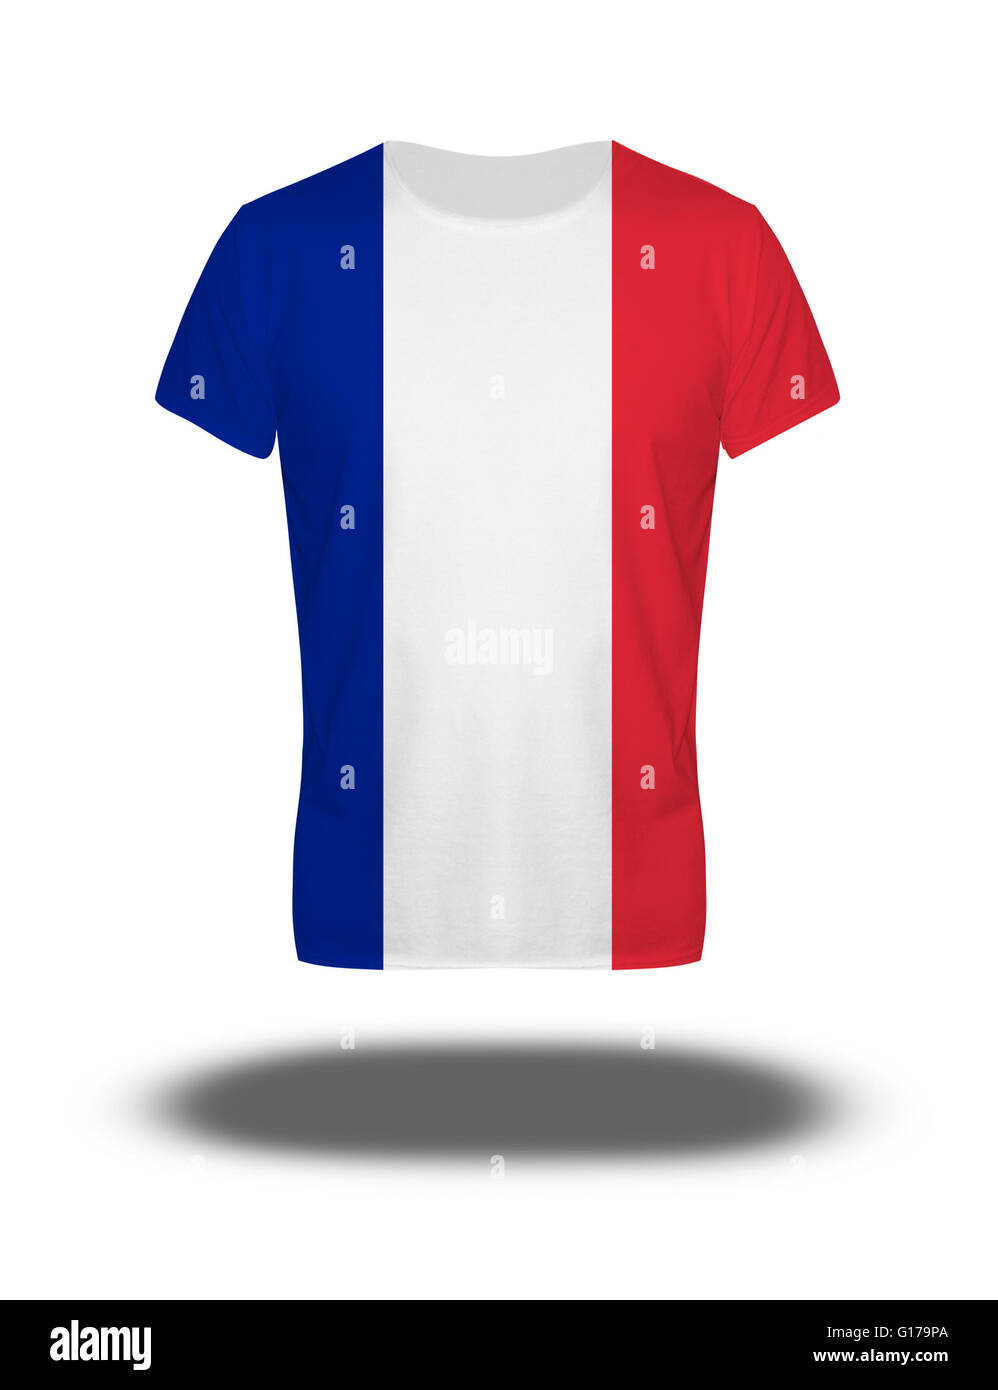 France flag t-shirt on white background with shadow Stock Photo